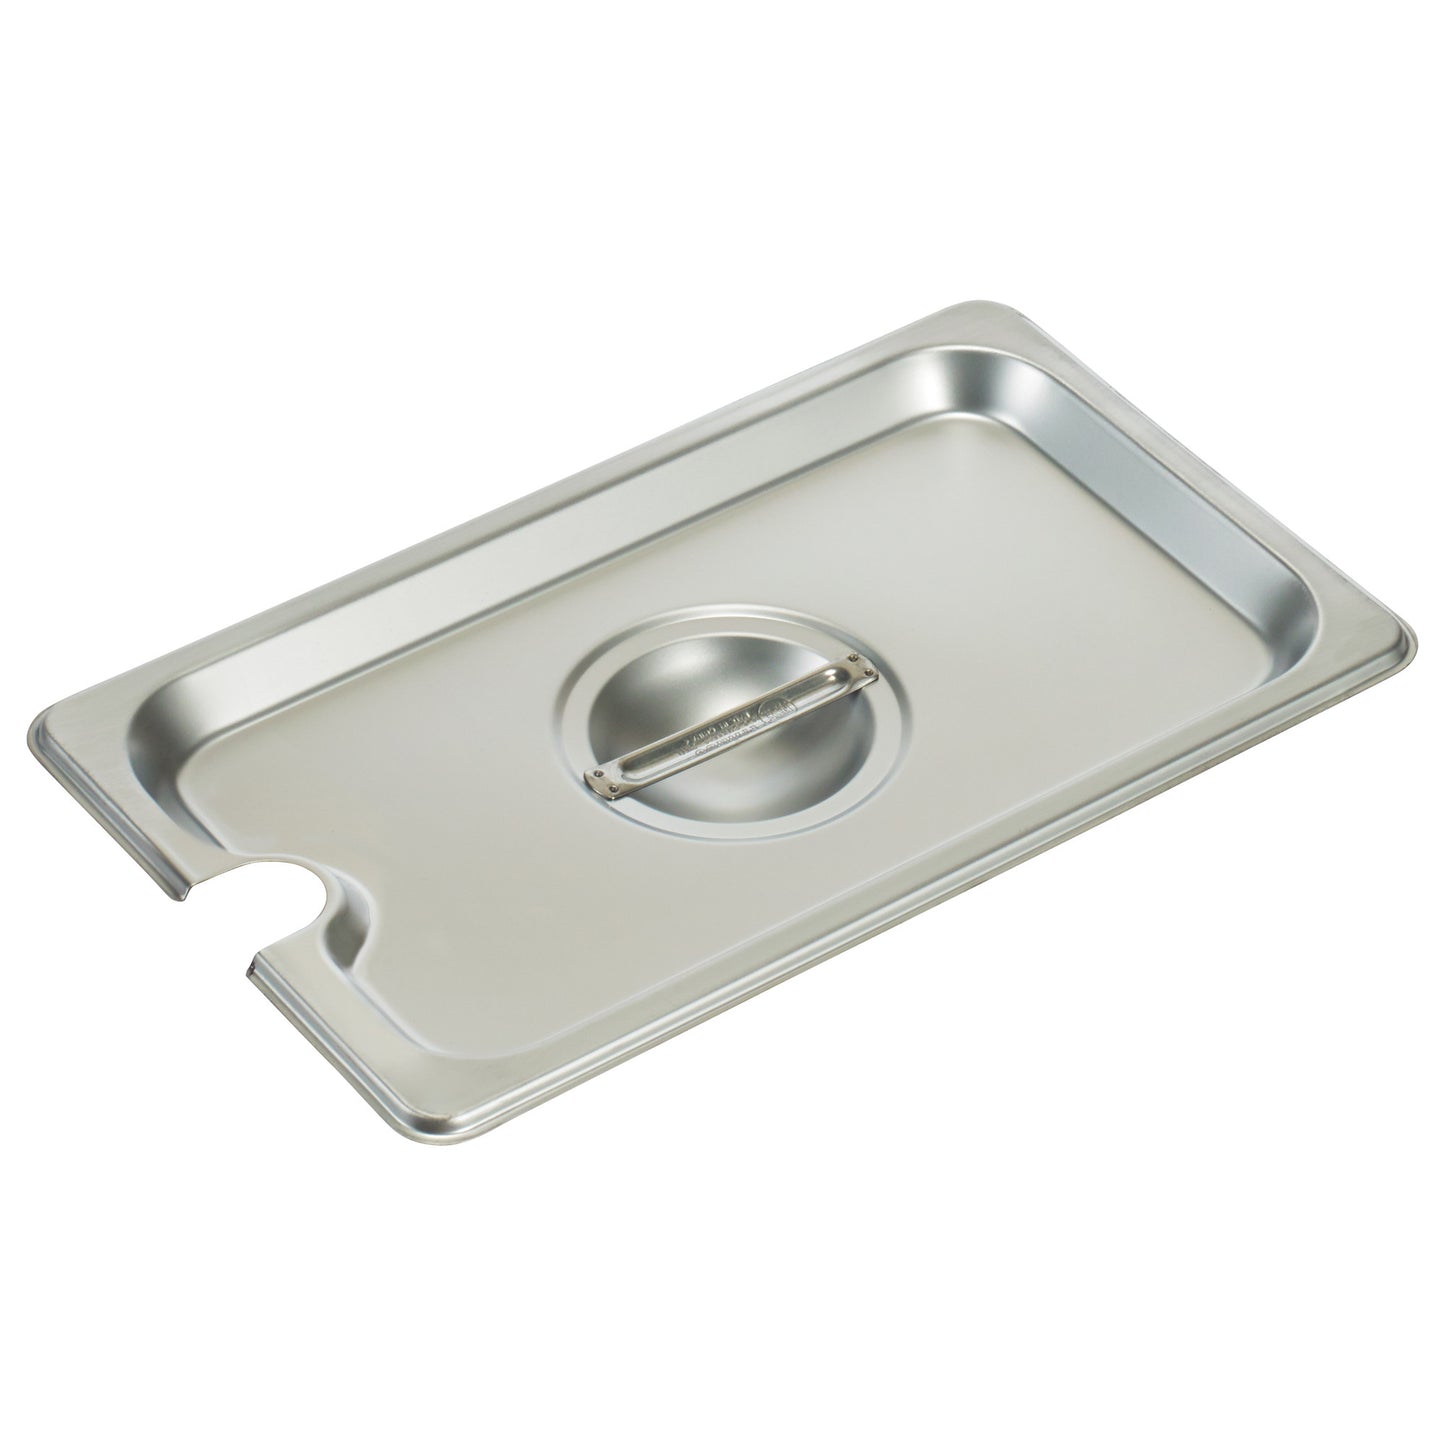 SPCQ - 18/8 Stainless Steel Steam Pan Cover, Slotted - 1/4